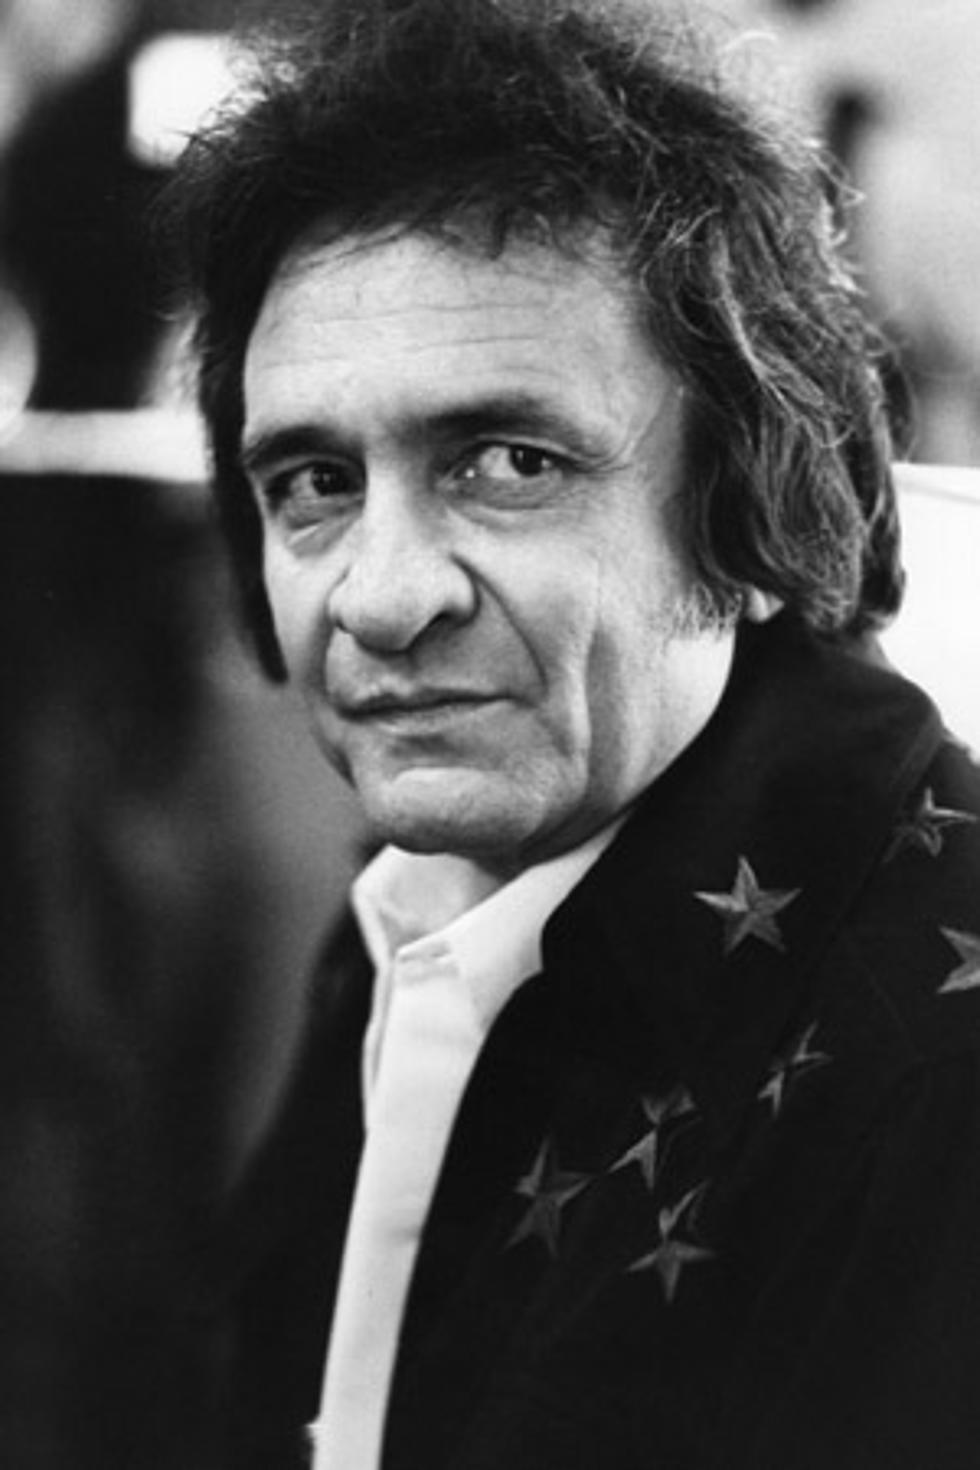 Johnny Cash Birthday Celebration Brings Out Friends, Family + Fans in Texas